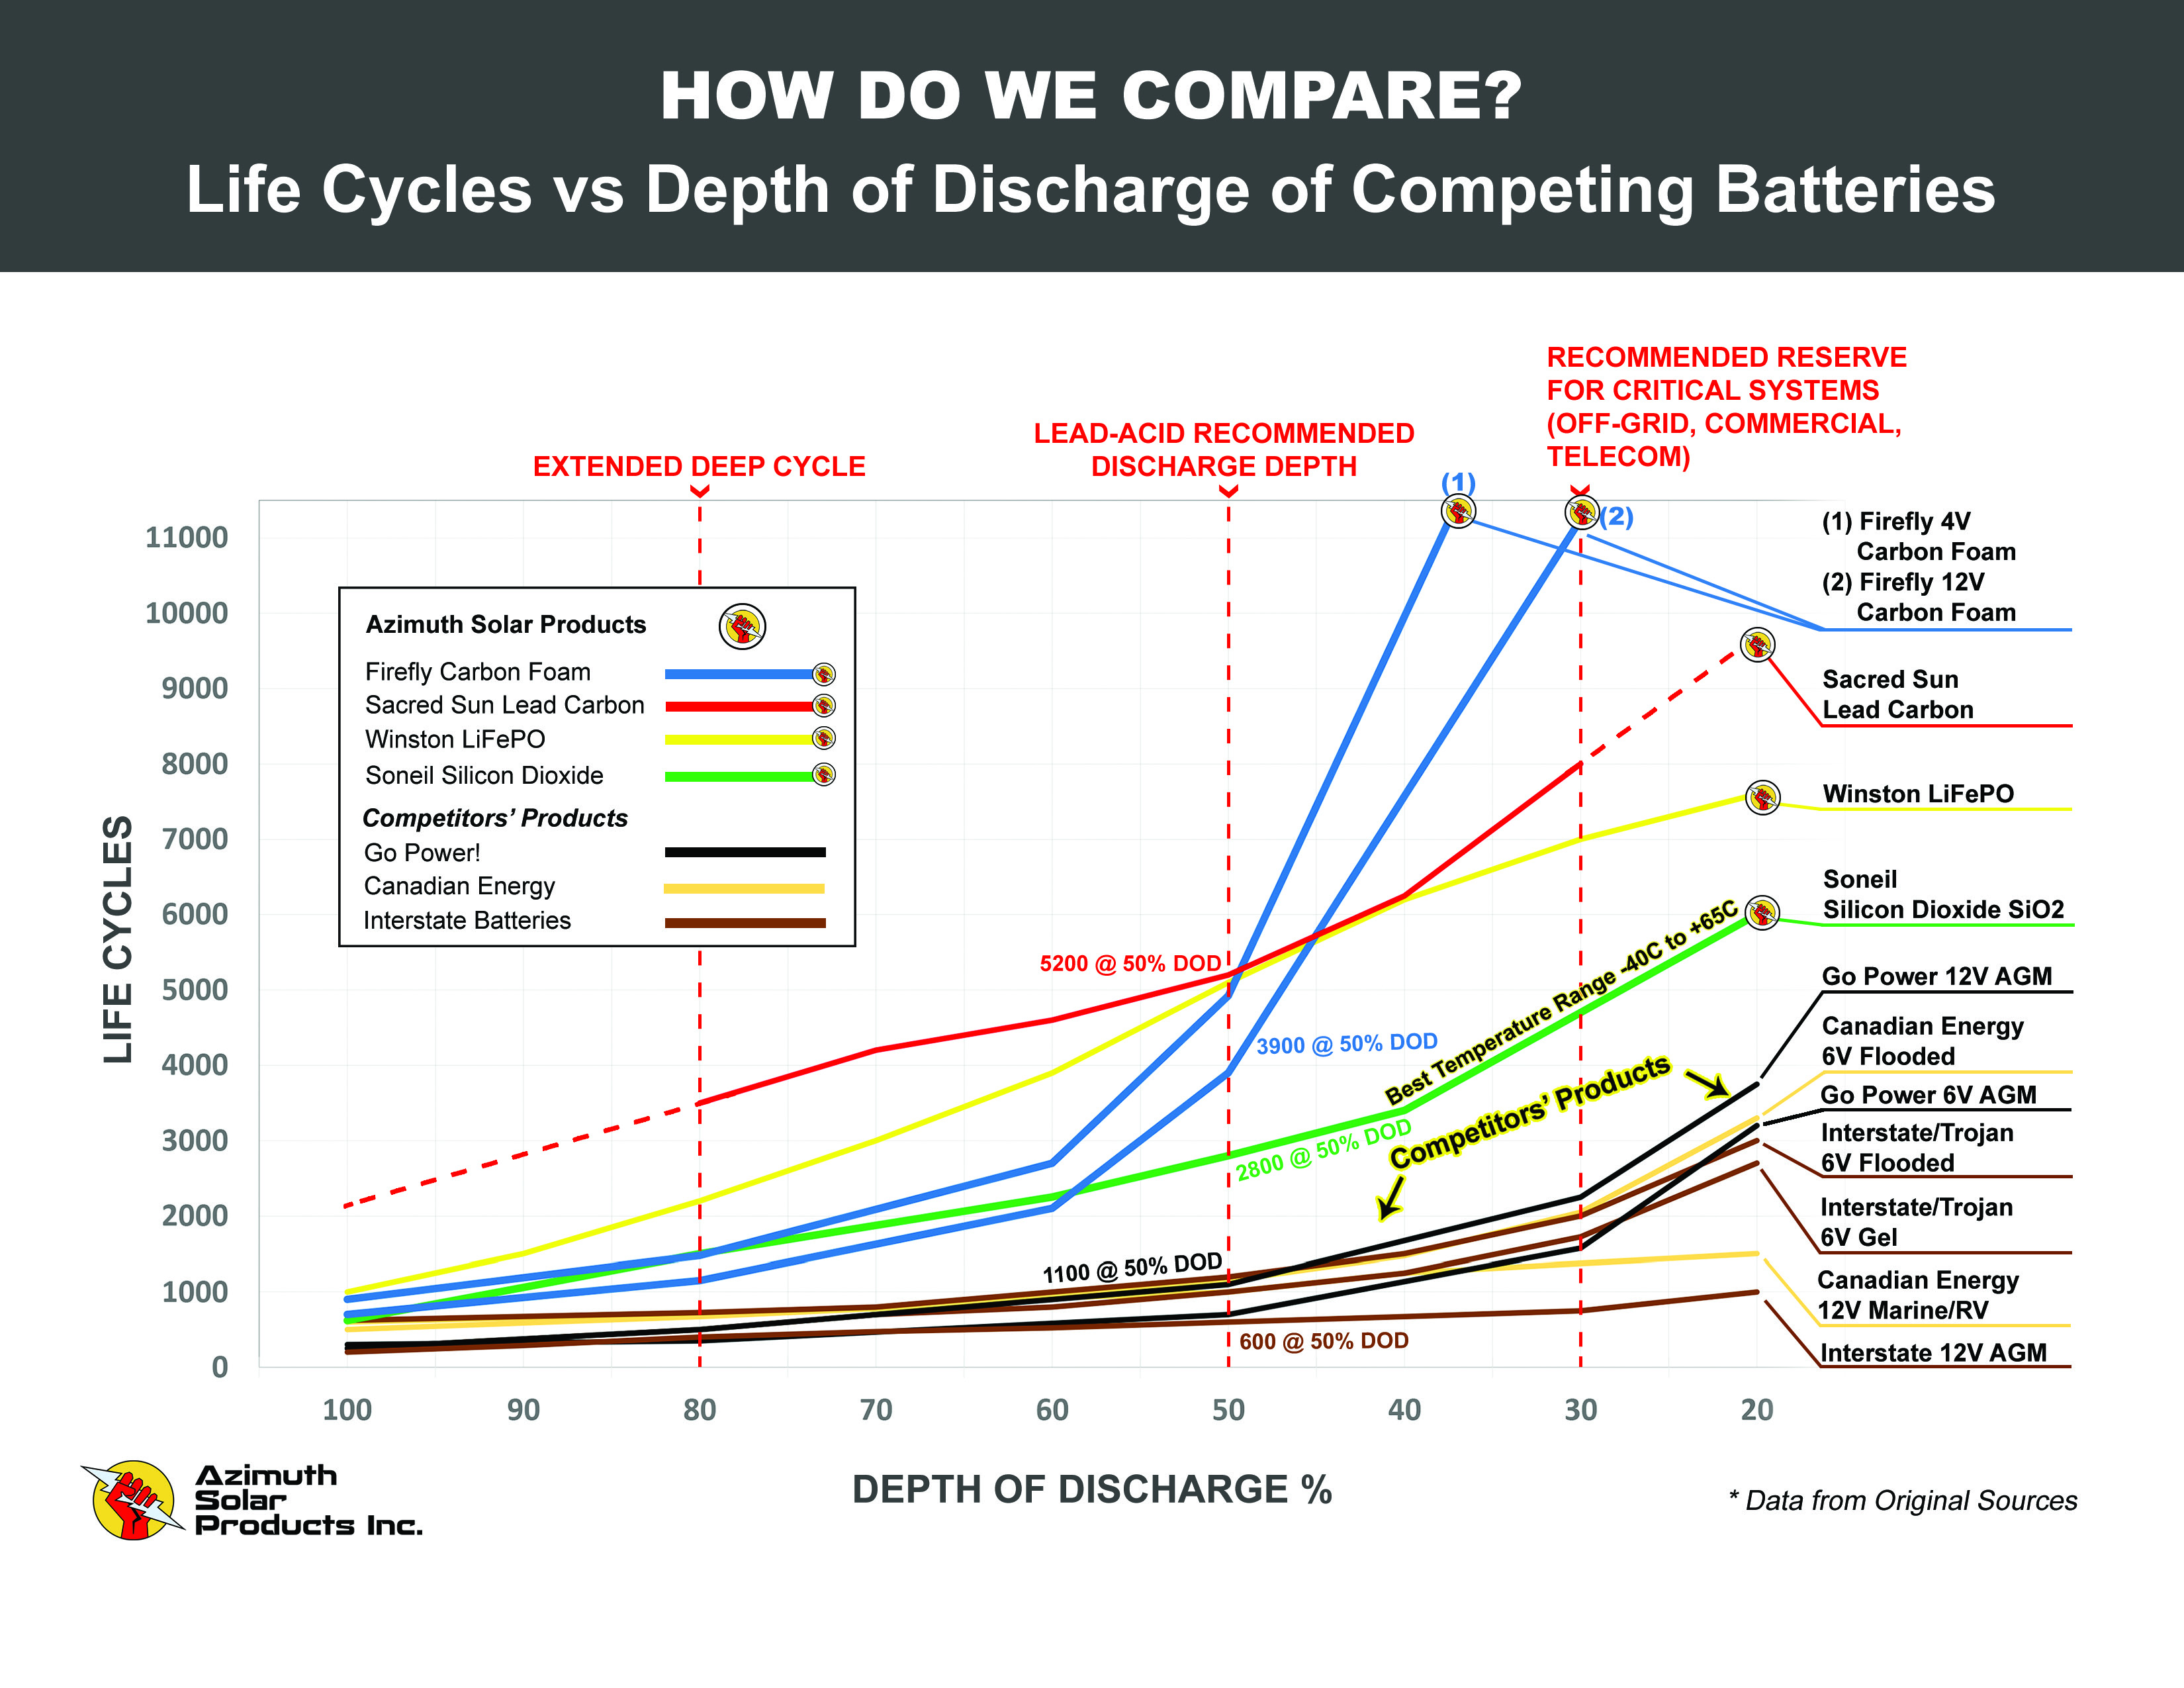 chart comparing life cycles vs. DoD of competing battery types